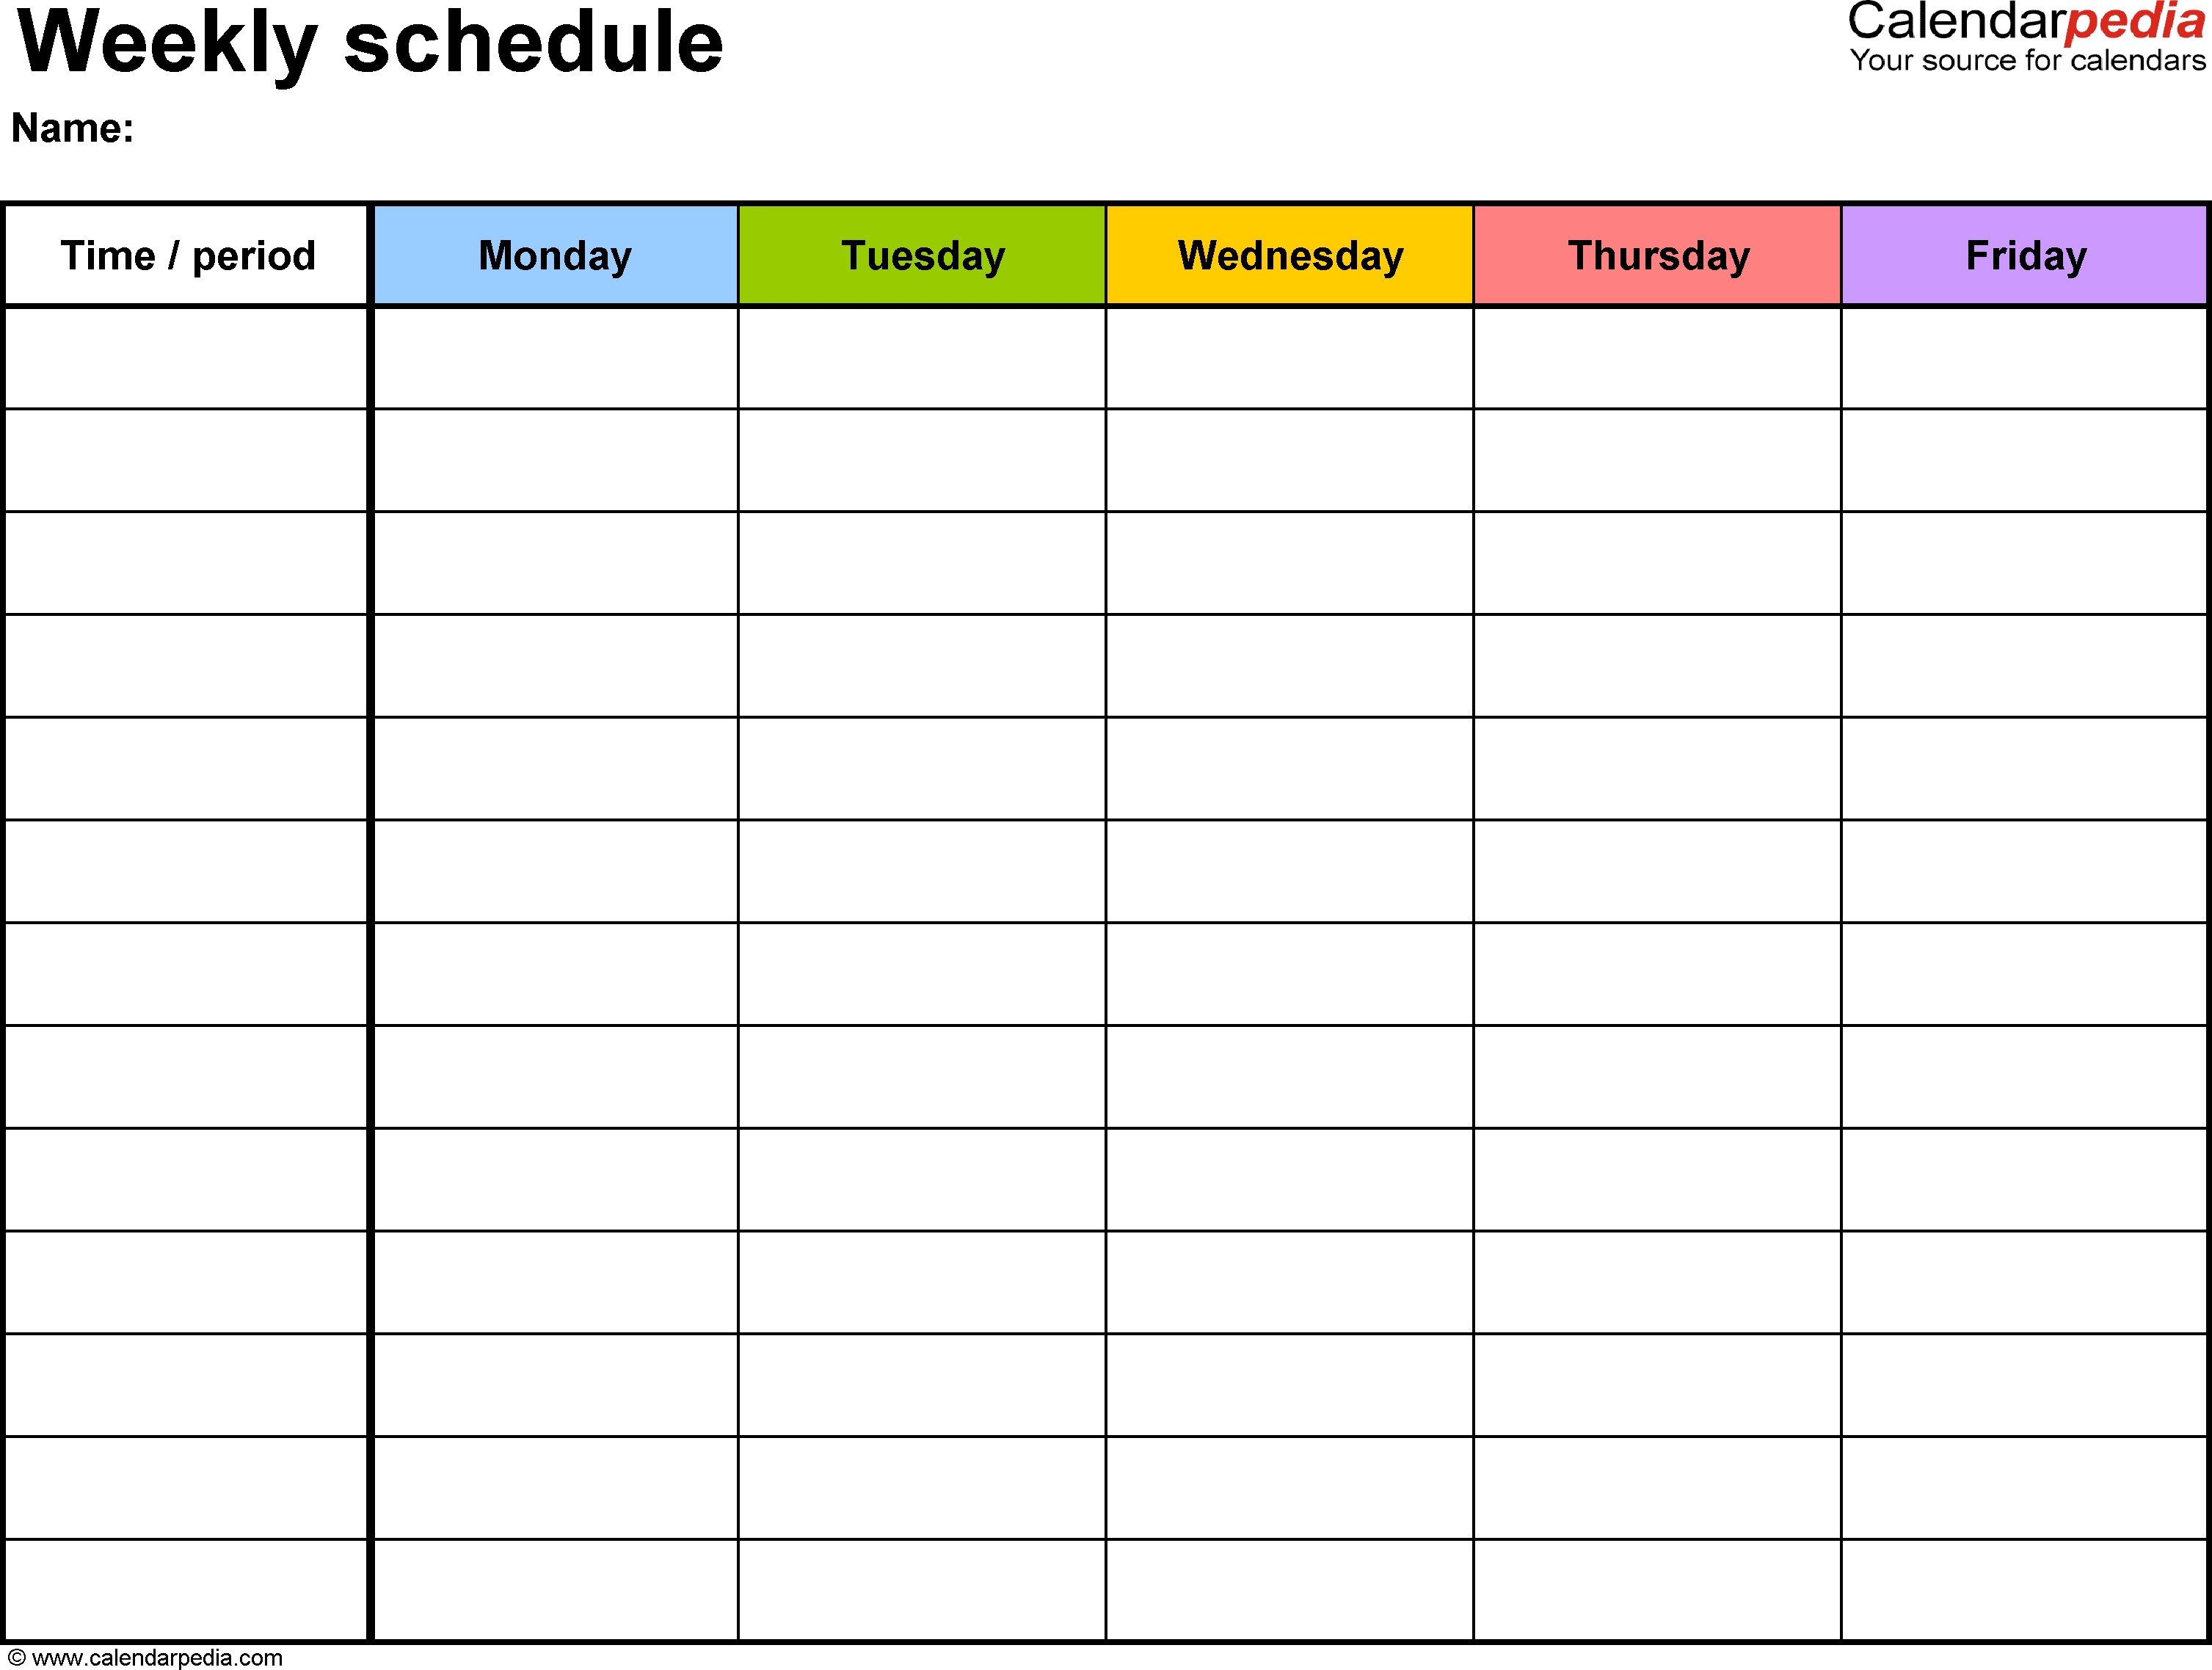 Free Weekly Schedule Templates For Excel - 18 Templates  Blank Schedule Sheet With Times